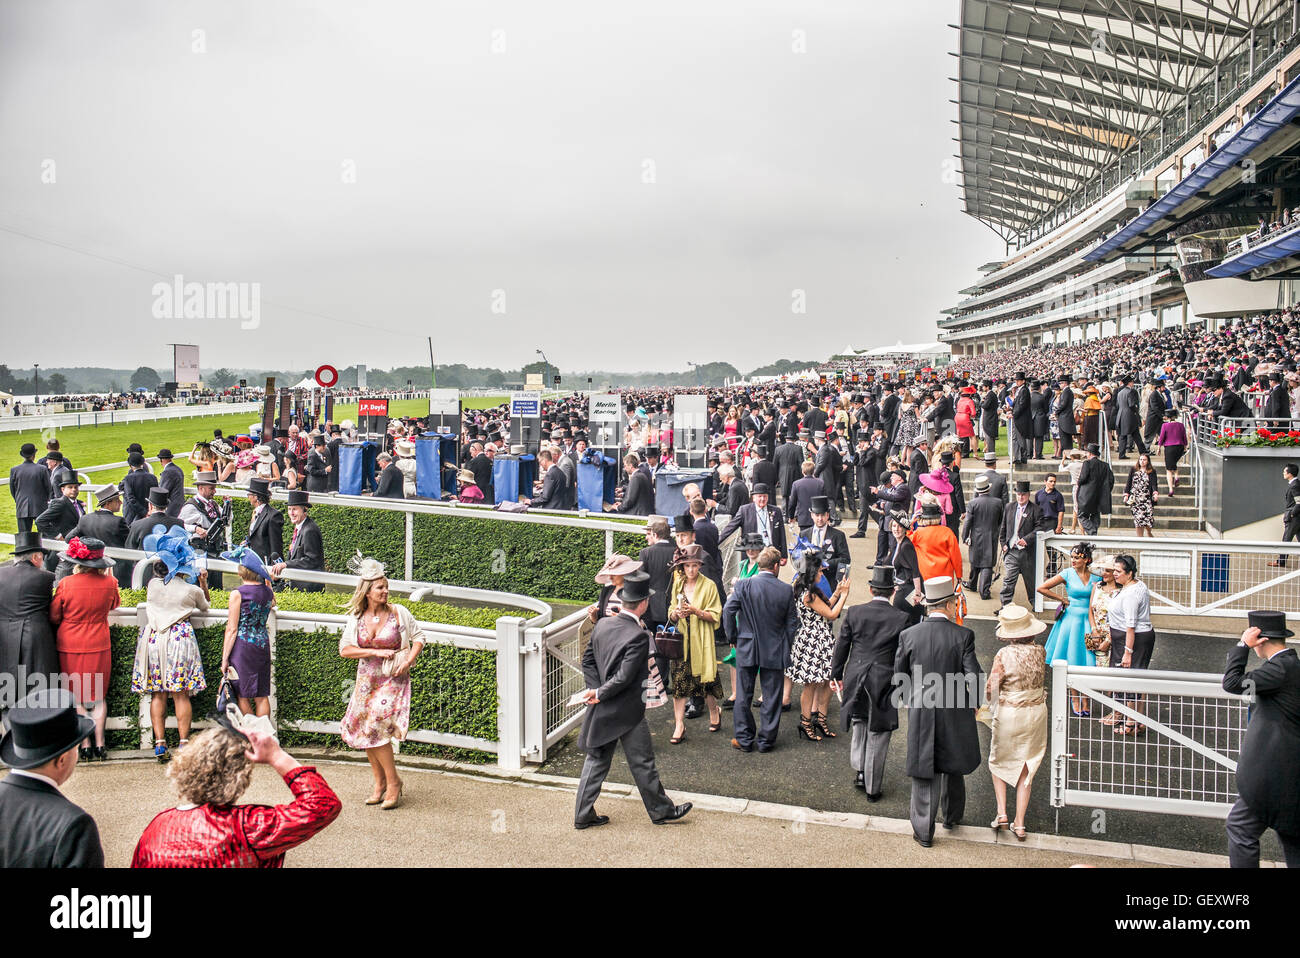 Crowds enjoying the atmosphere on Ladies Day at Ascot Racecourse. Stock Photo